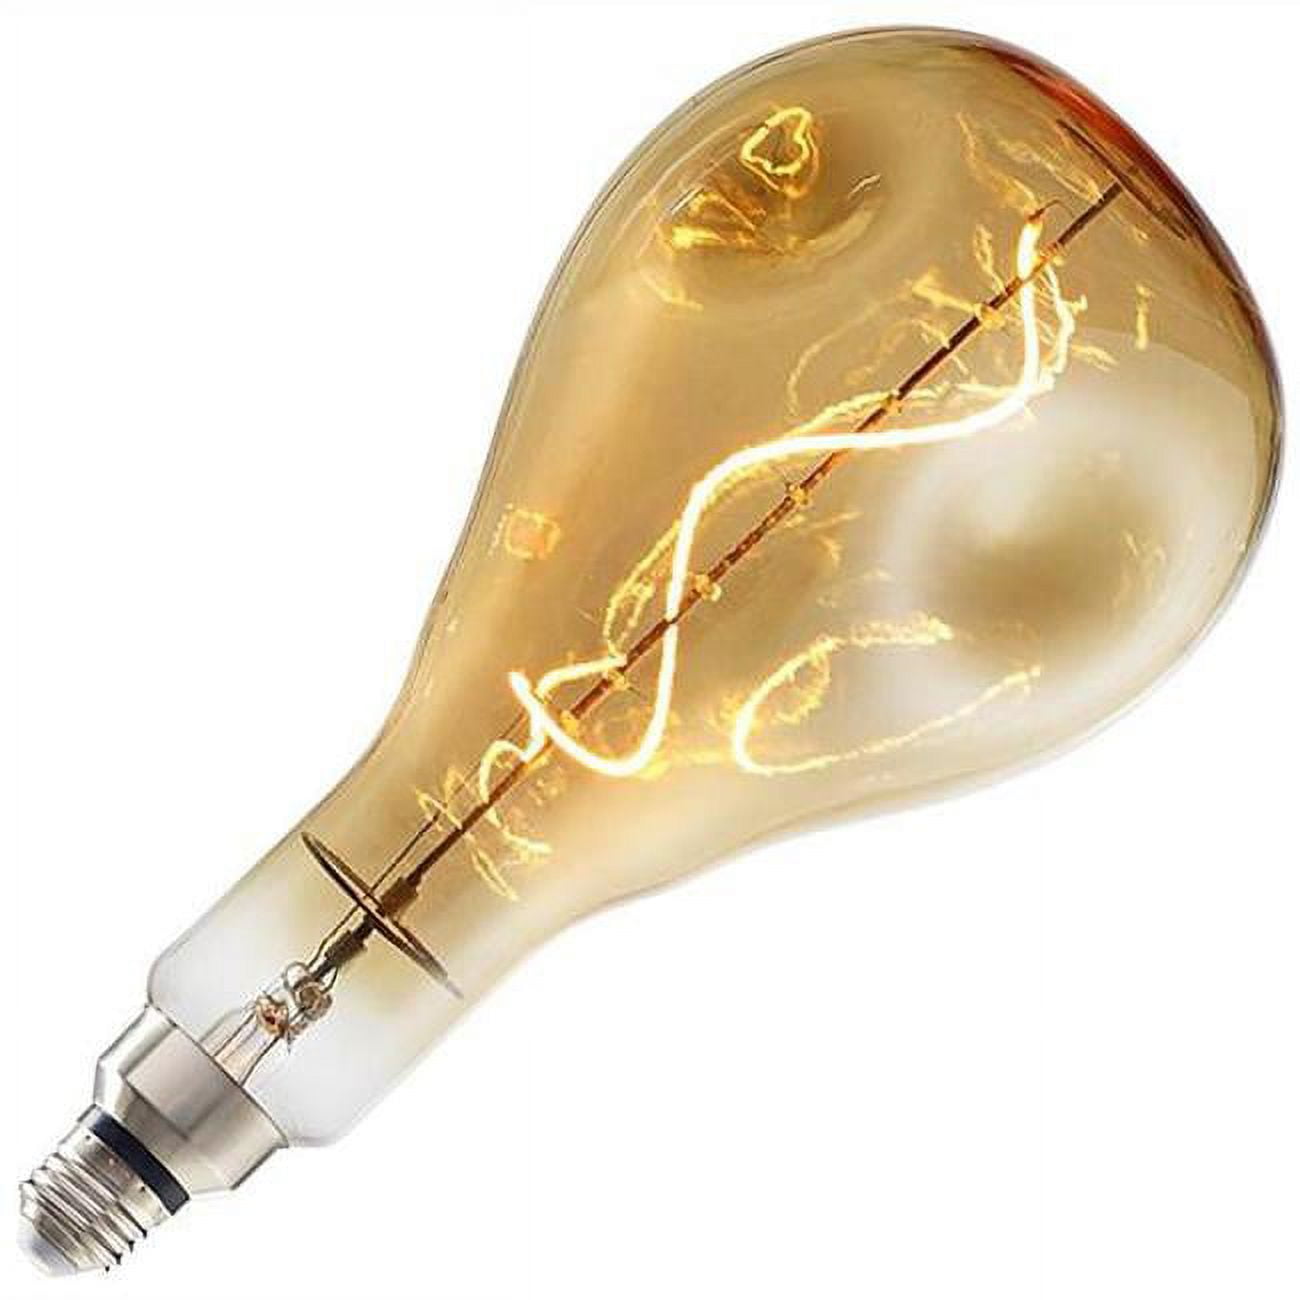 Picture of Bulbrite Grand Naturals Collection 4 Watt Dimmable Droplet Shape Oversized Decorative LED Light Bulb with Medium (E26) Base  2000K Amber Light  200 Lumens  Antique Glass Finish